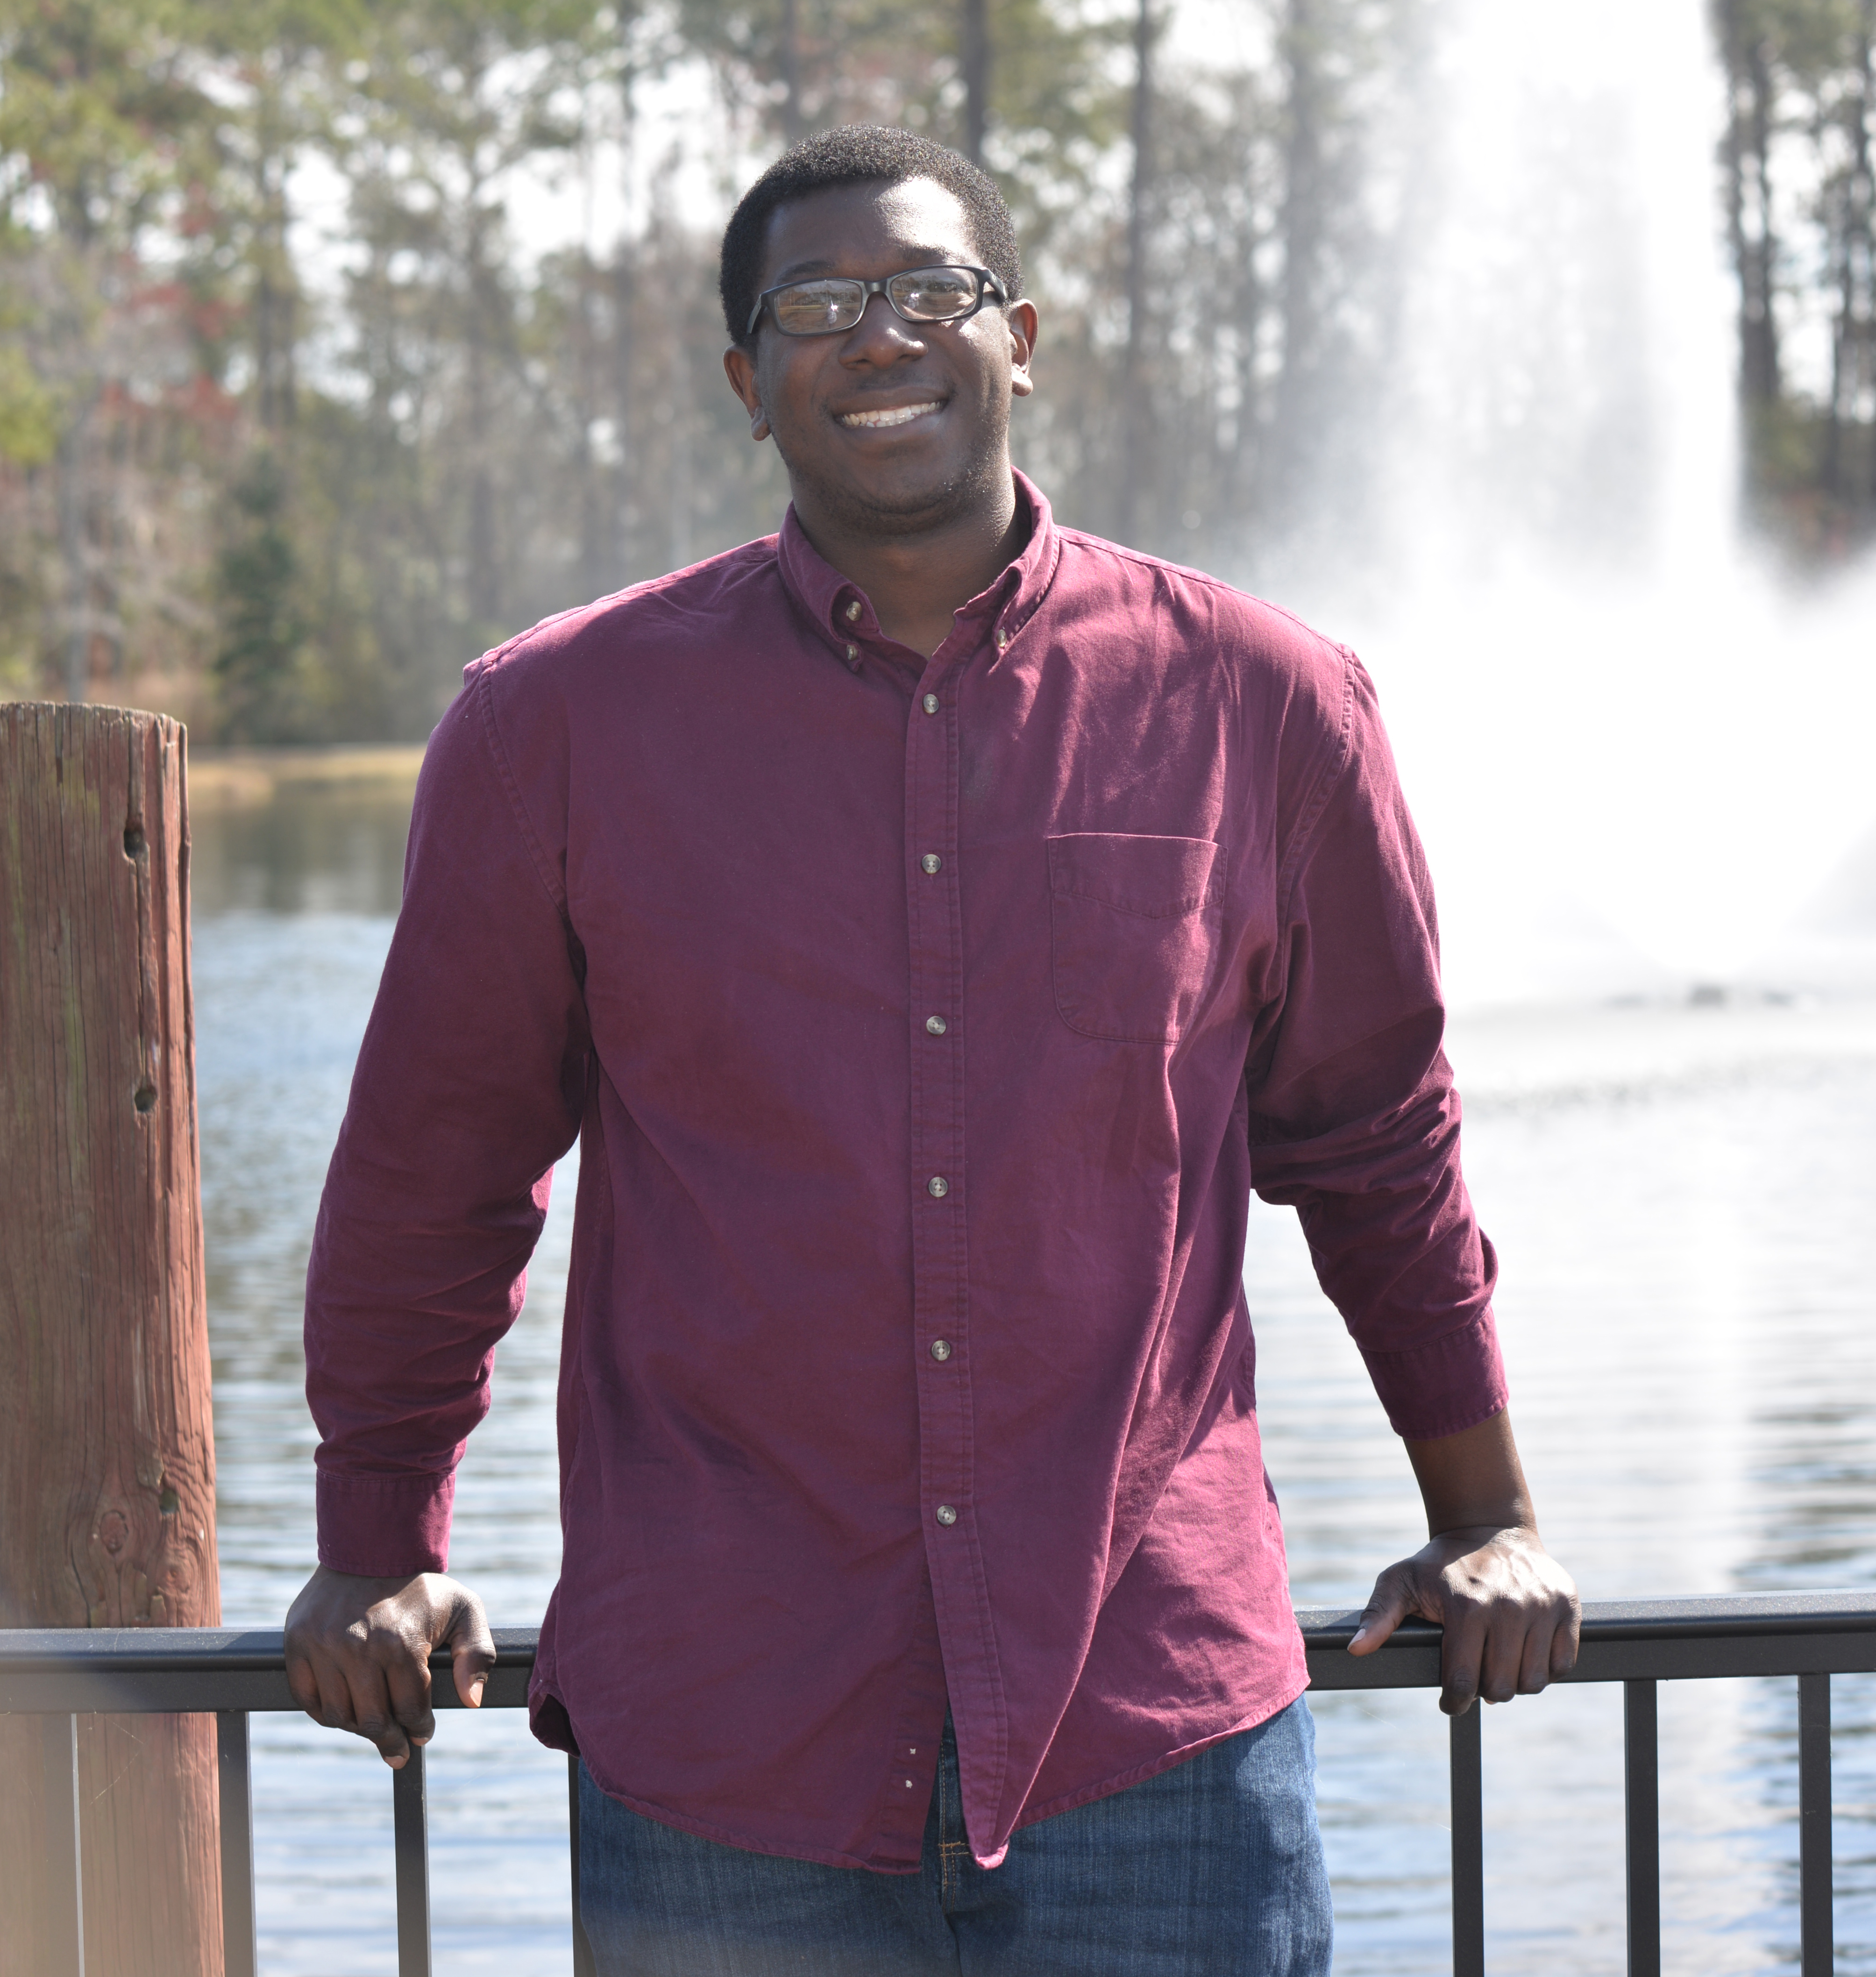 College of Coastal Georgia student Eric Seals stands by one of his favorite spots on campus, Lake Teel.